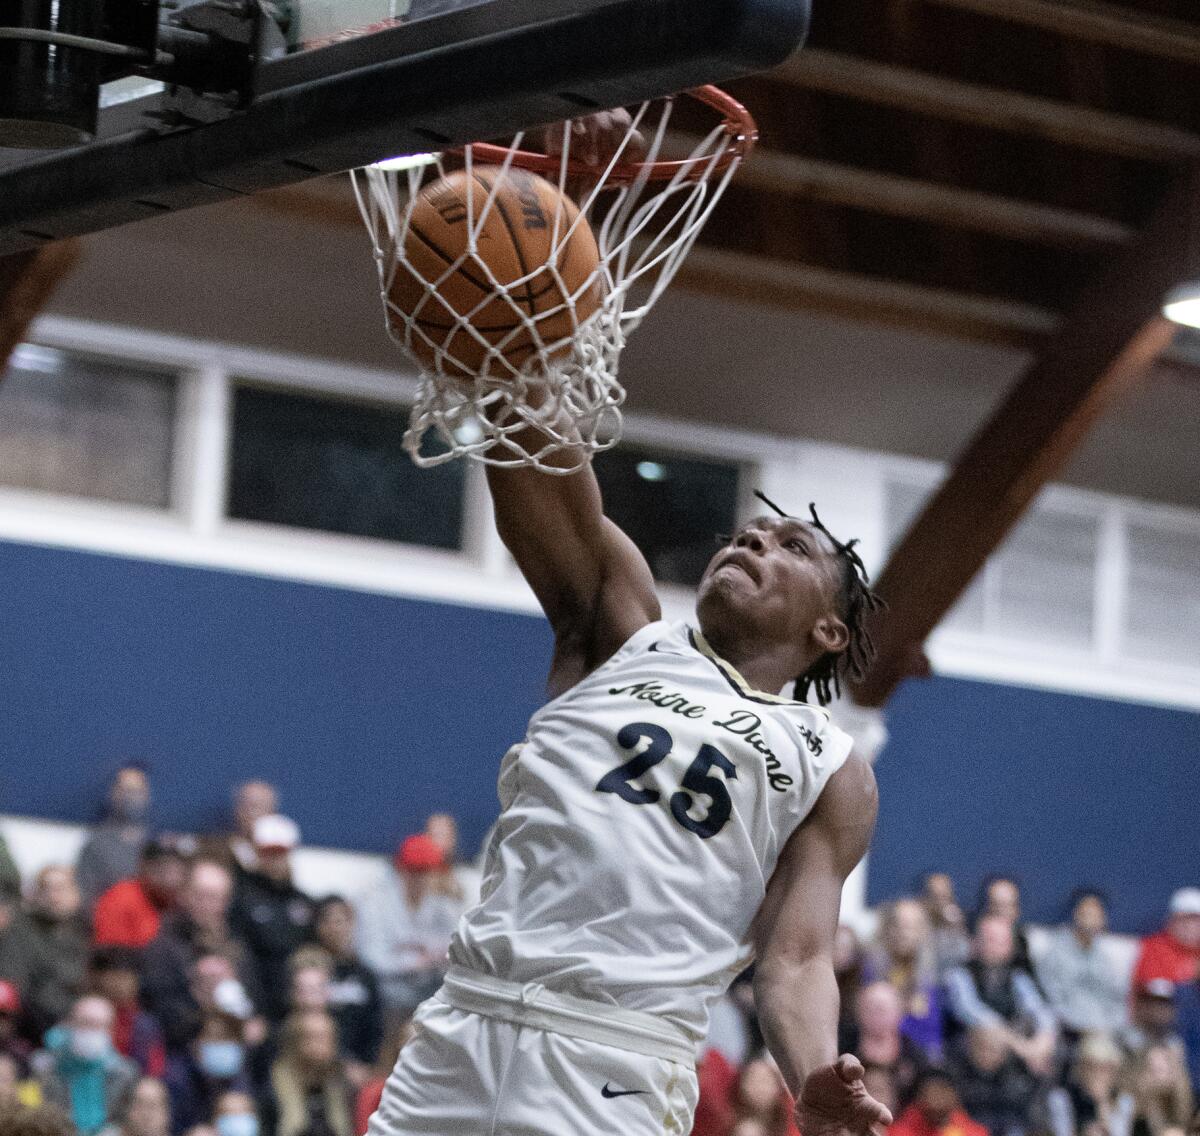 Notre Dame's Mercy Miller dunks the ball as two Harvard-Westlake players watch.